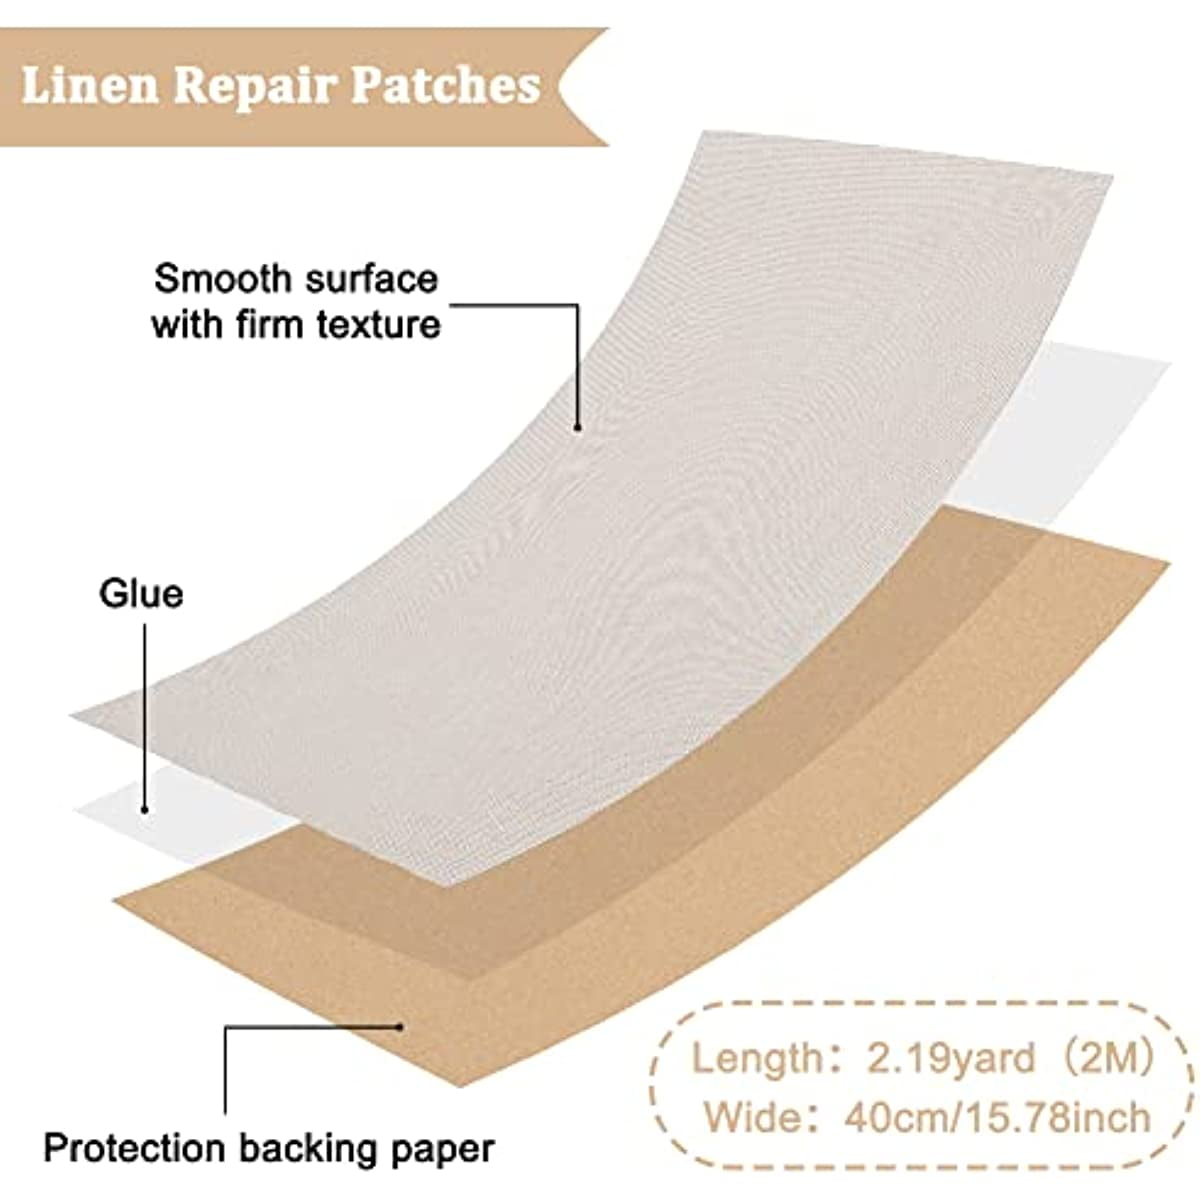 Uxcell 2Pcs Fabric Repair Patch 7.8x11.8 Fine Linen Self Adhesive Patch  for Sofa Clothing Cushion Pillow, Grey Green 